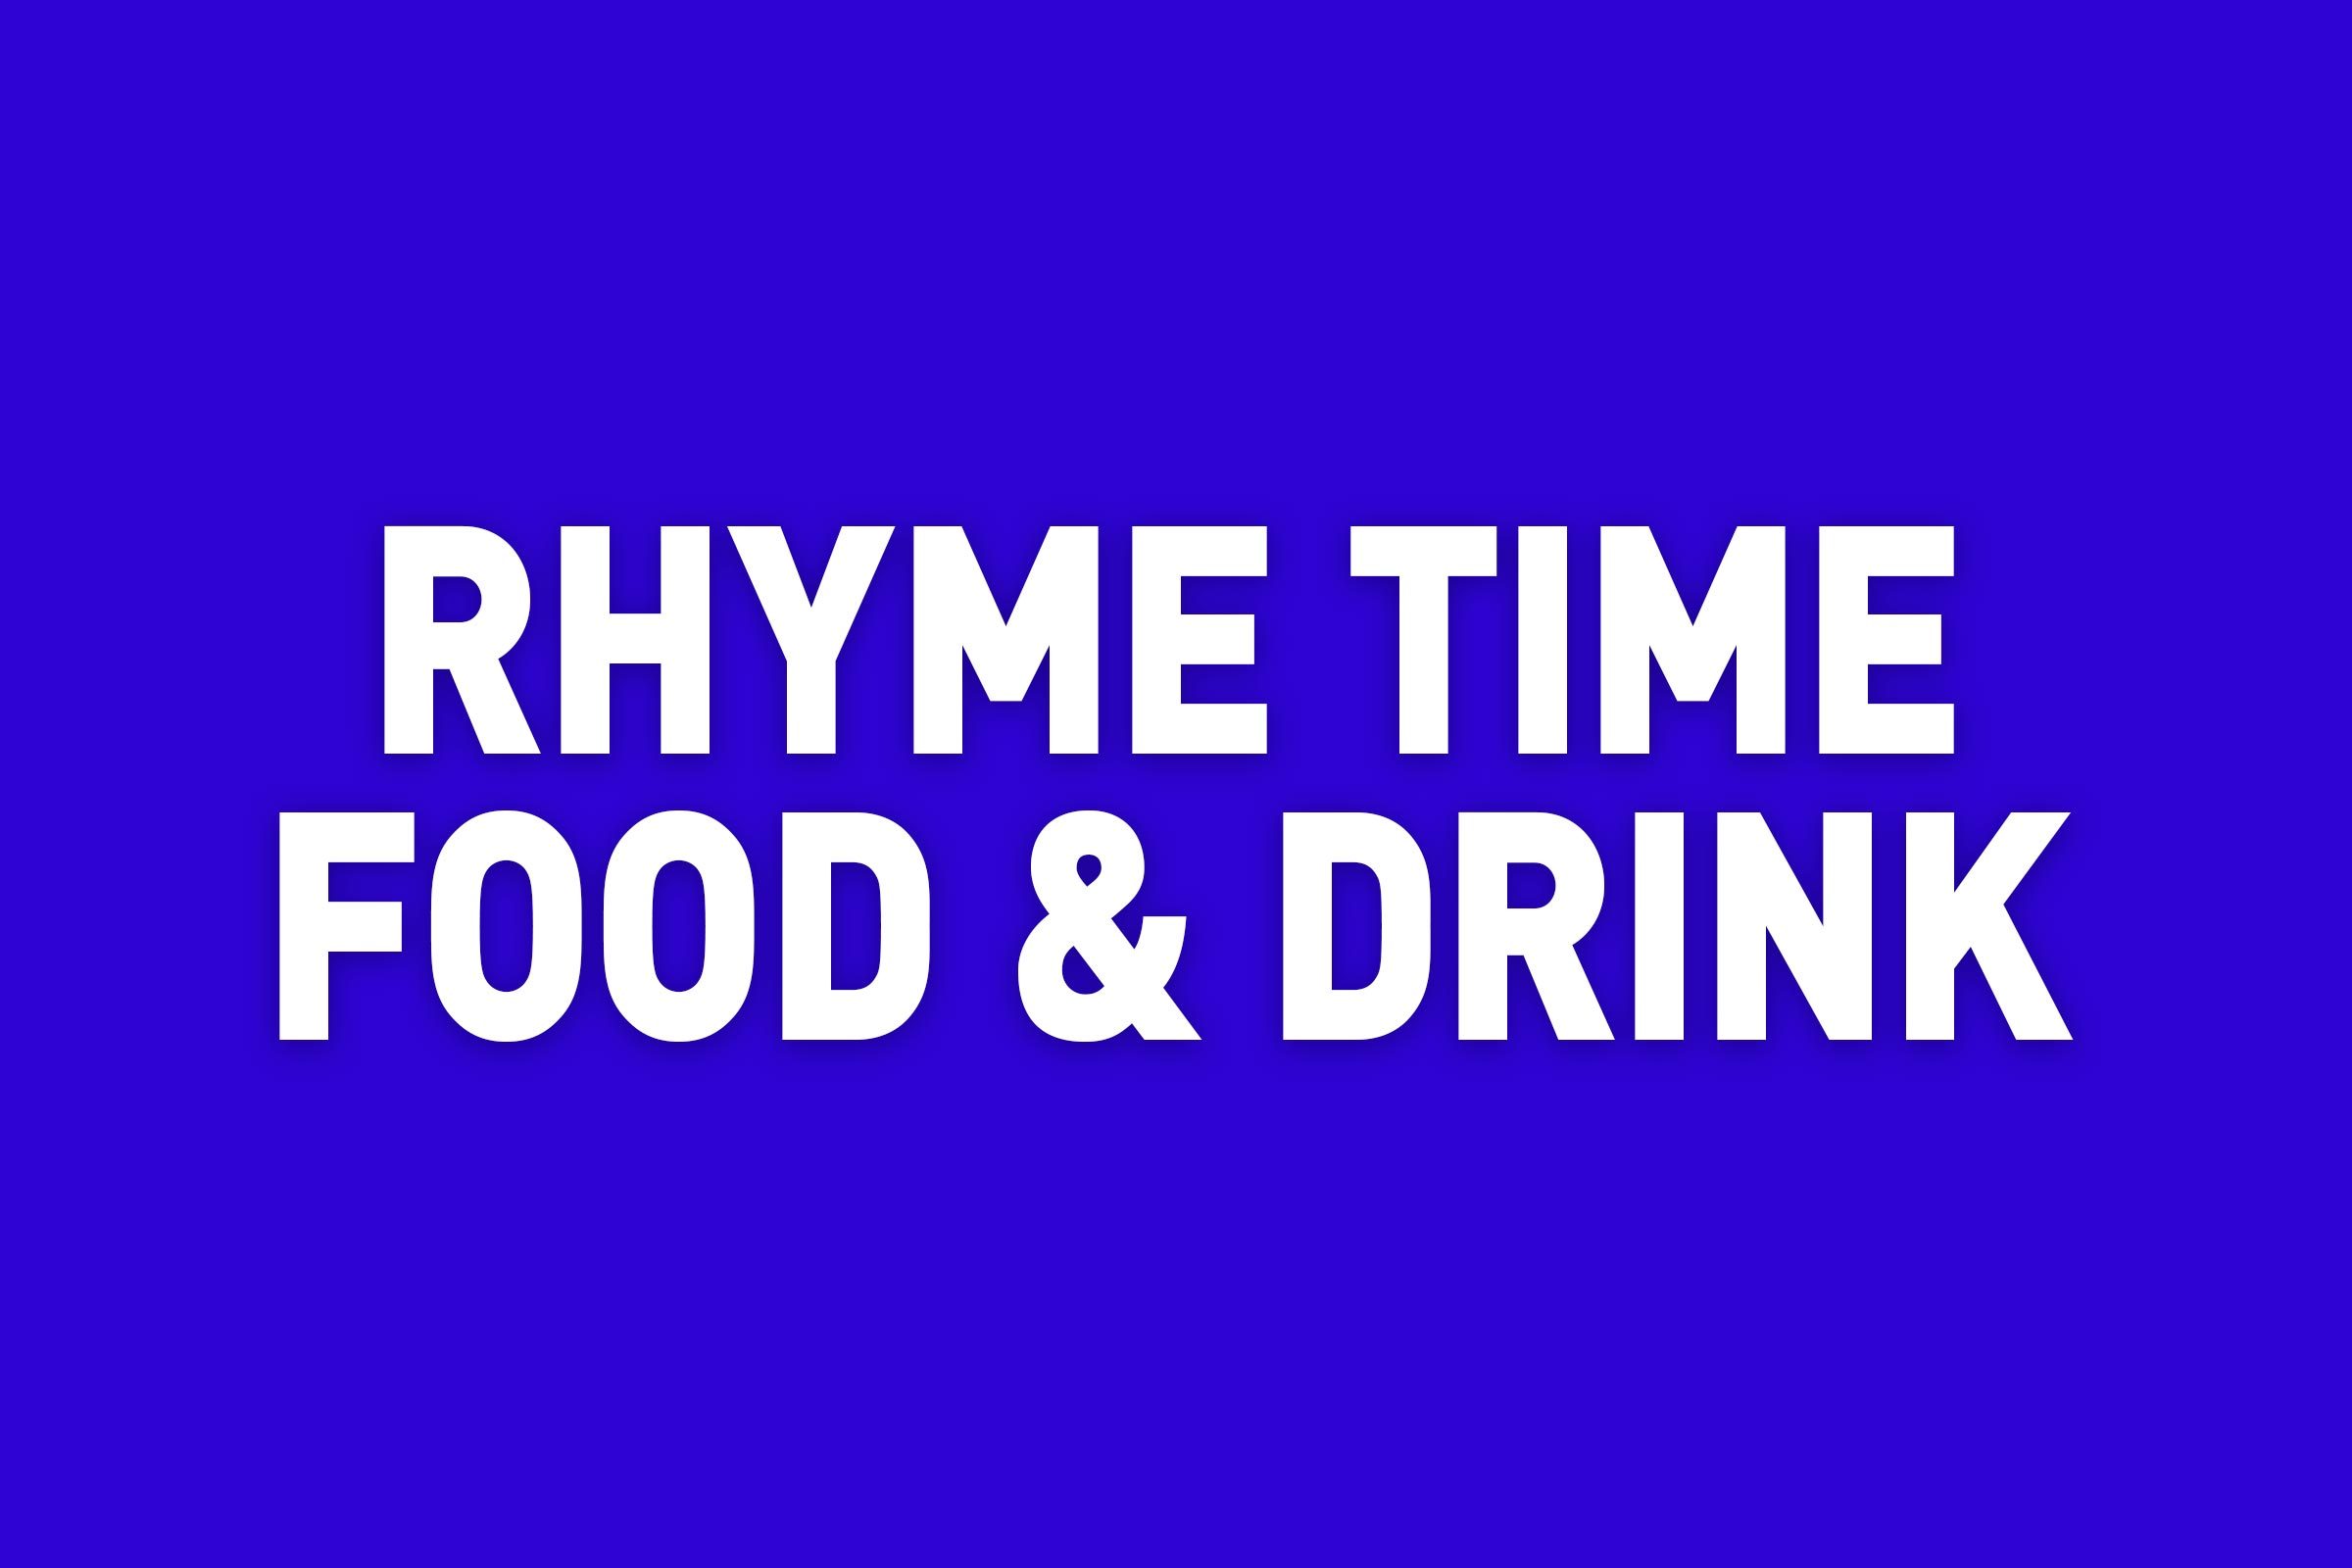 rhyme time food & drink jeopardy category